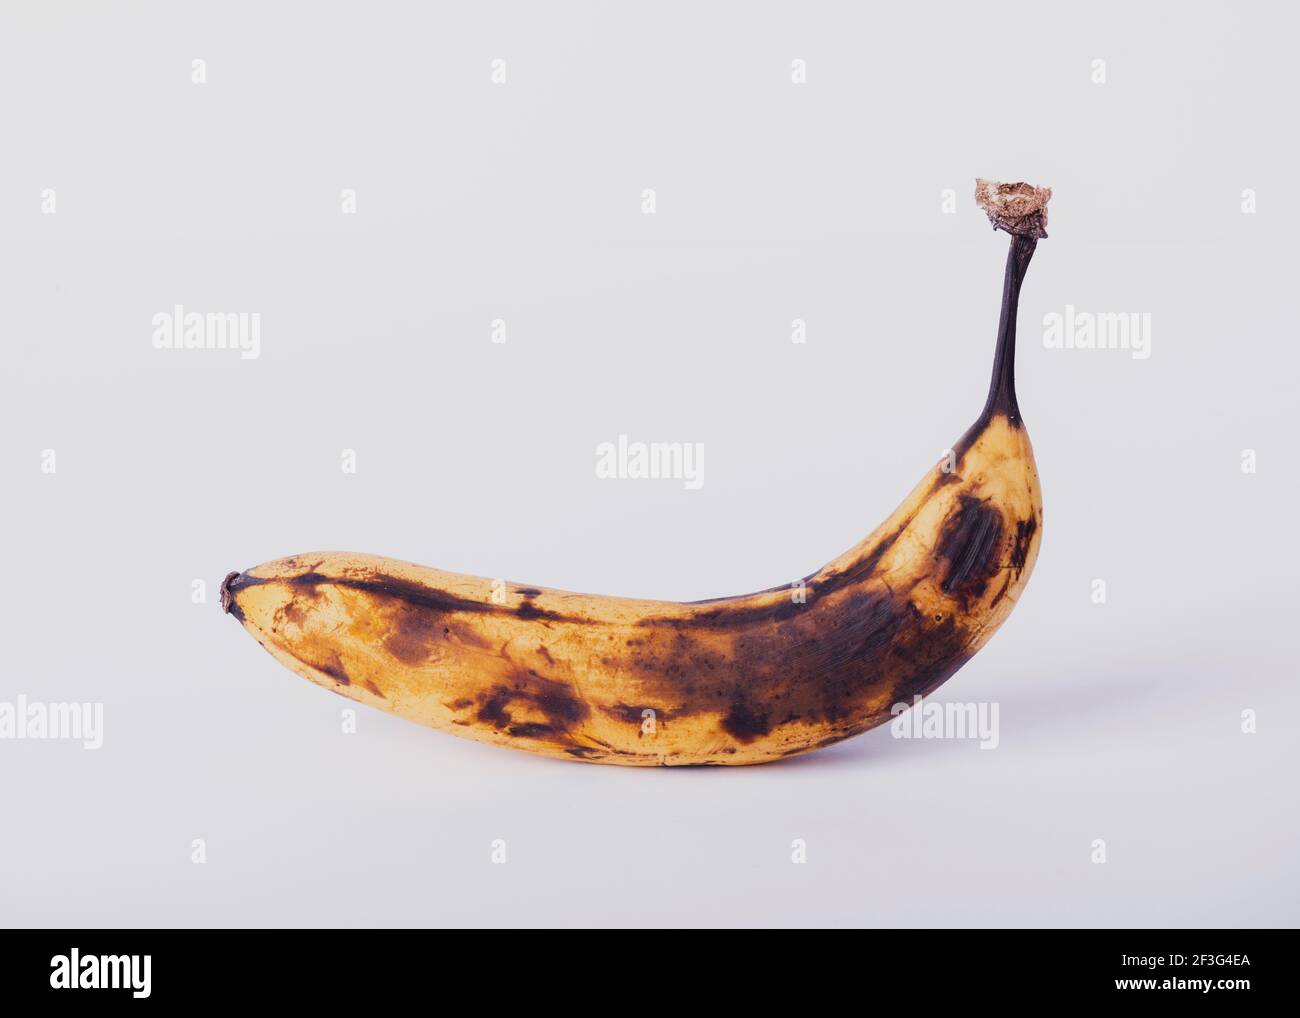 Does anyone have a high-res image of our 19/20 'bruised banana